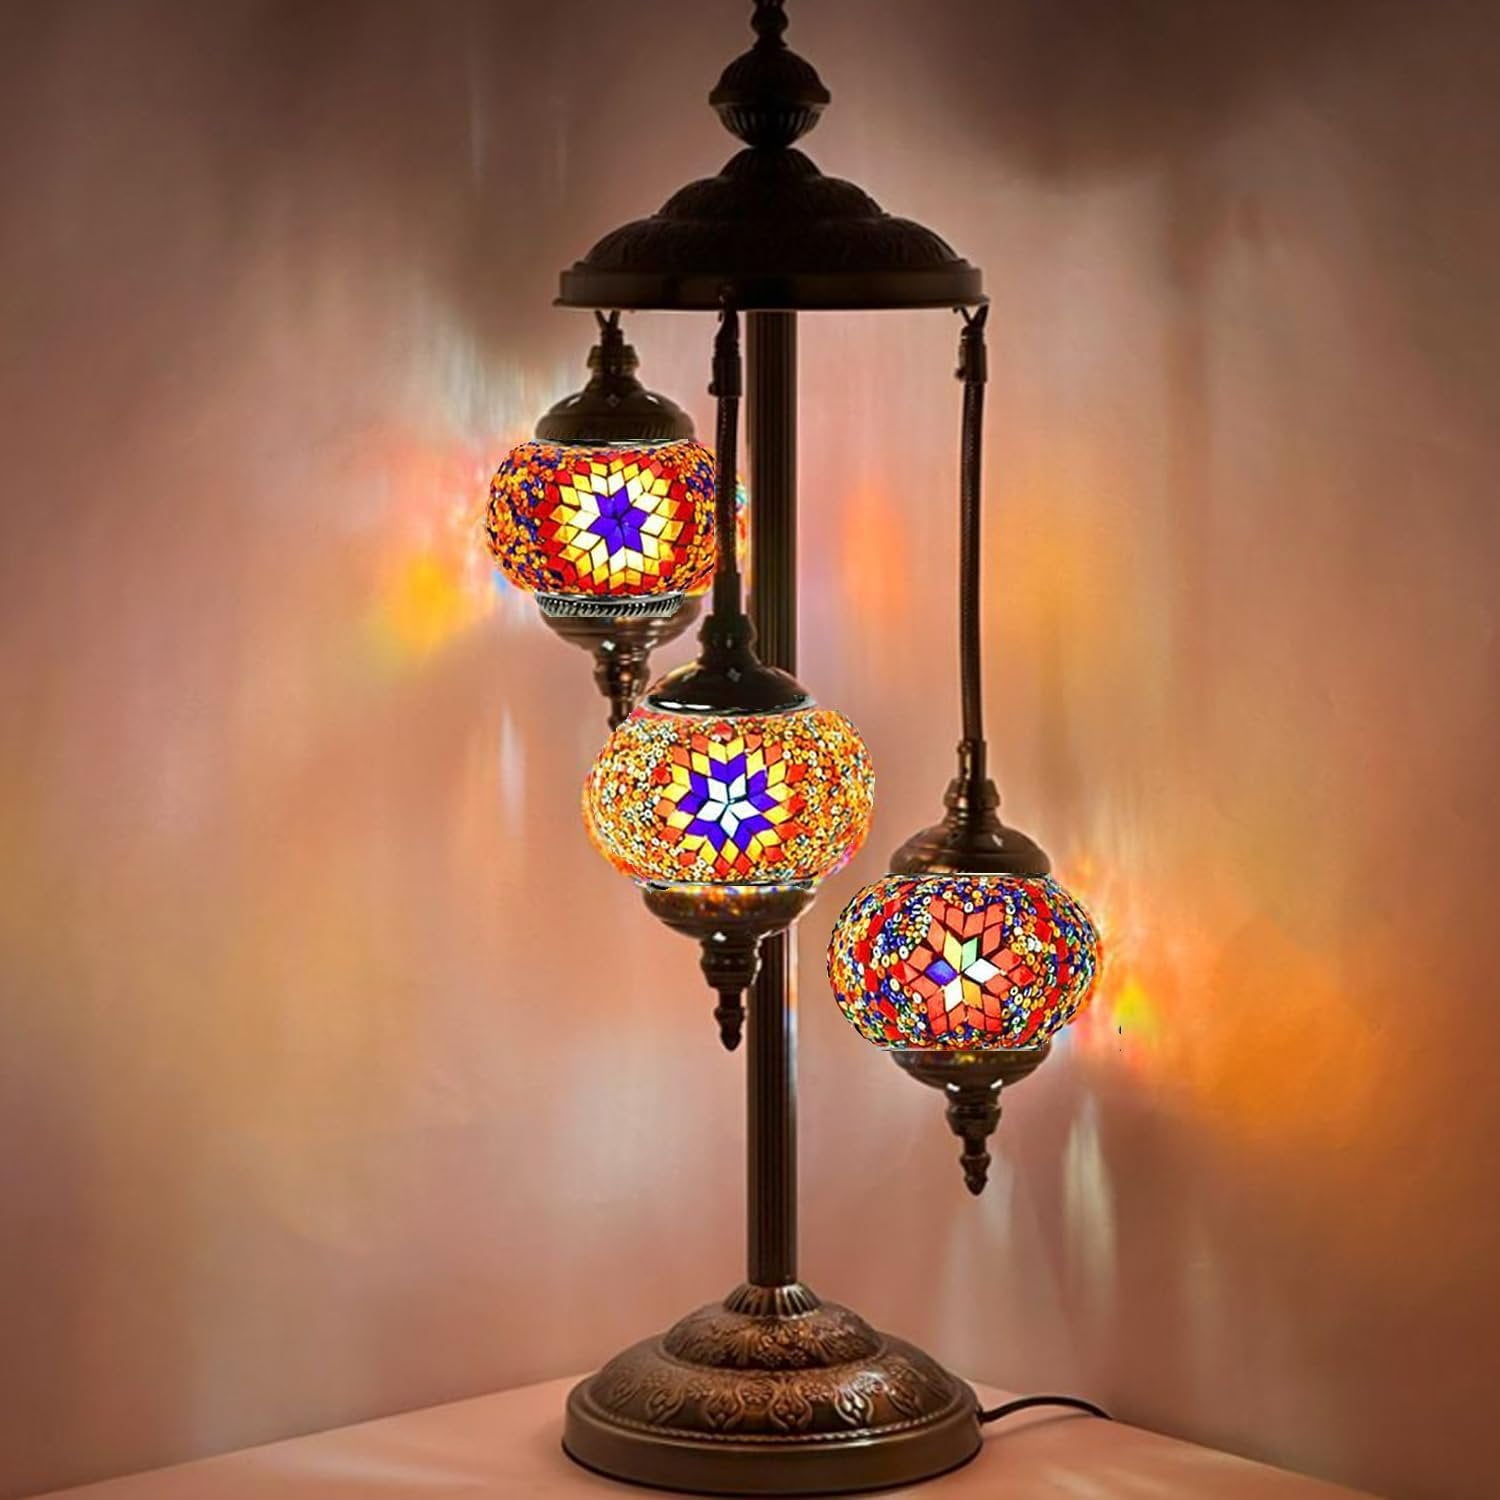 SILVERFEVER Moroccan Lamps Mosaic Turkish Lamp Tier Lanterns Colorful Handmade Glass Floor or Table with E 12 Bulbs in Red Orange -